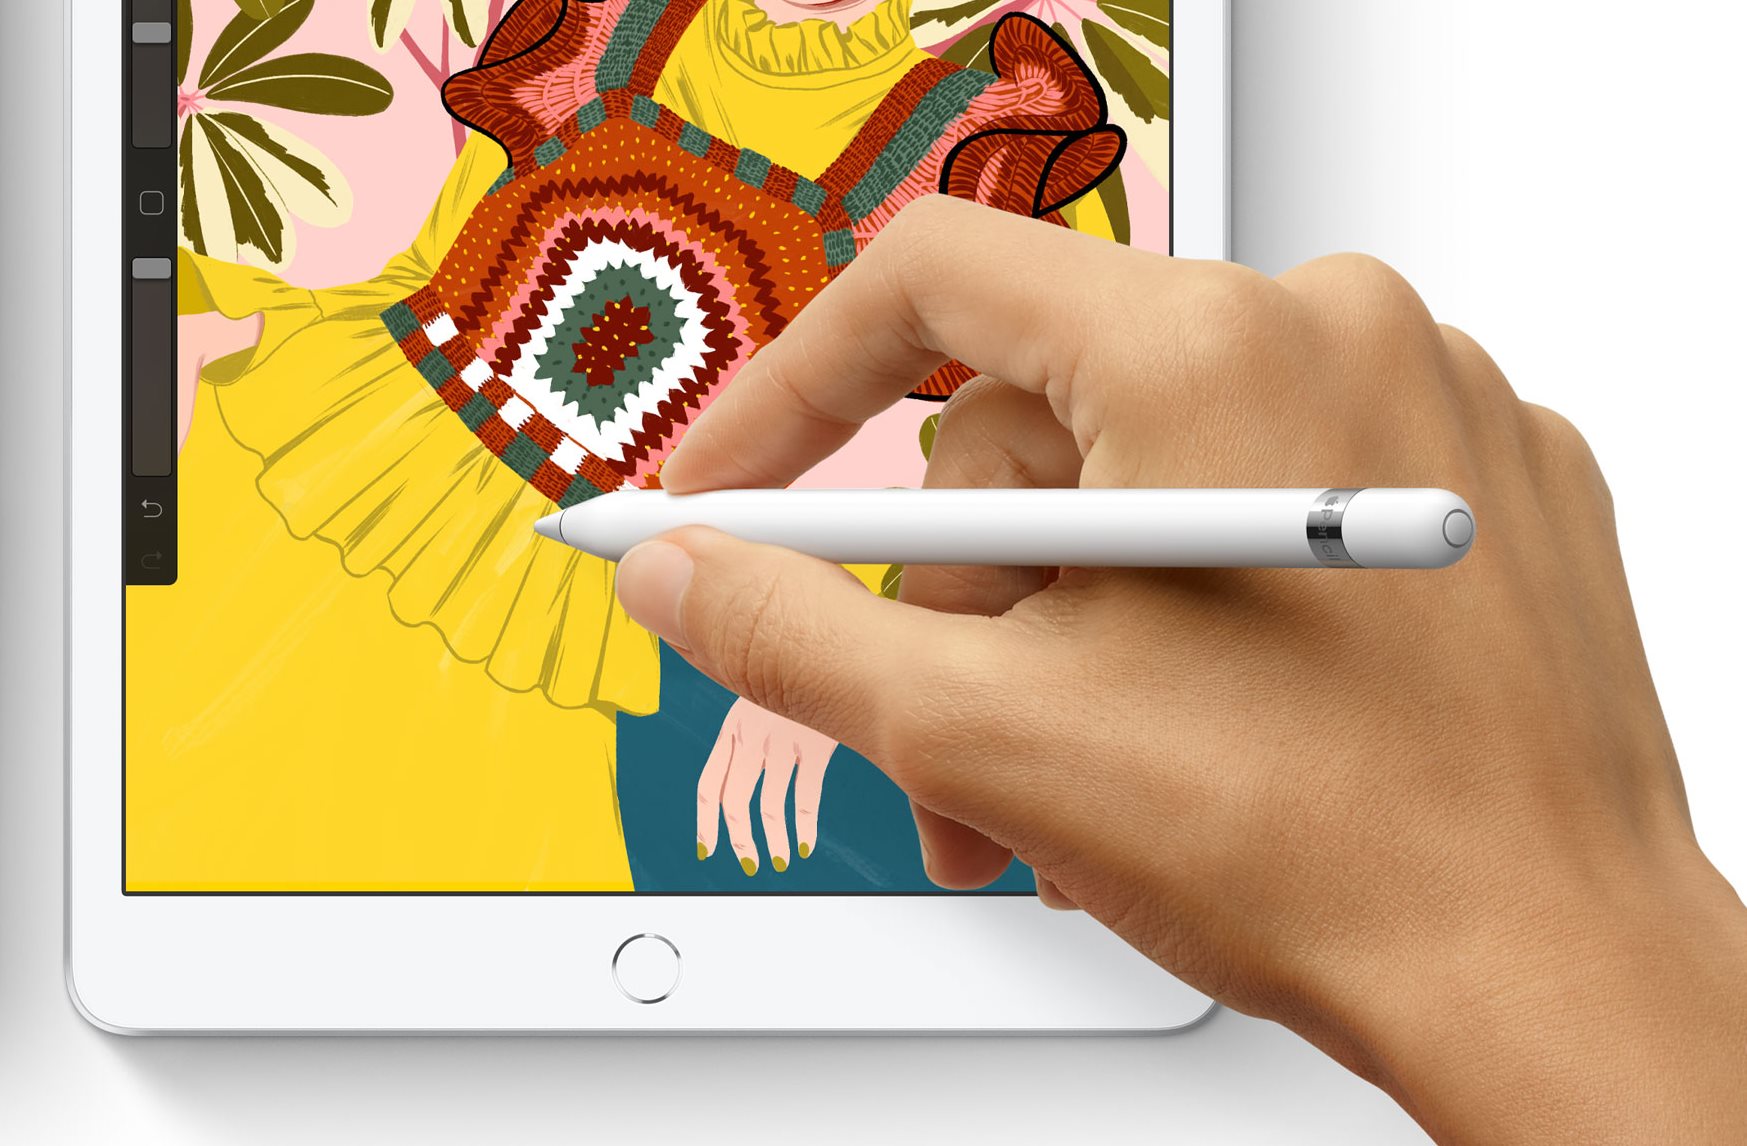 No surprise foldable iphone to work with the apple pencil 532175 2